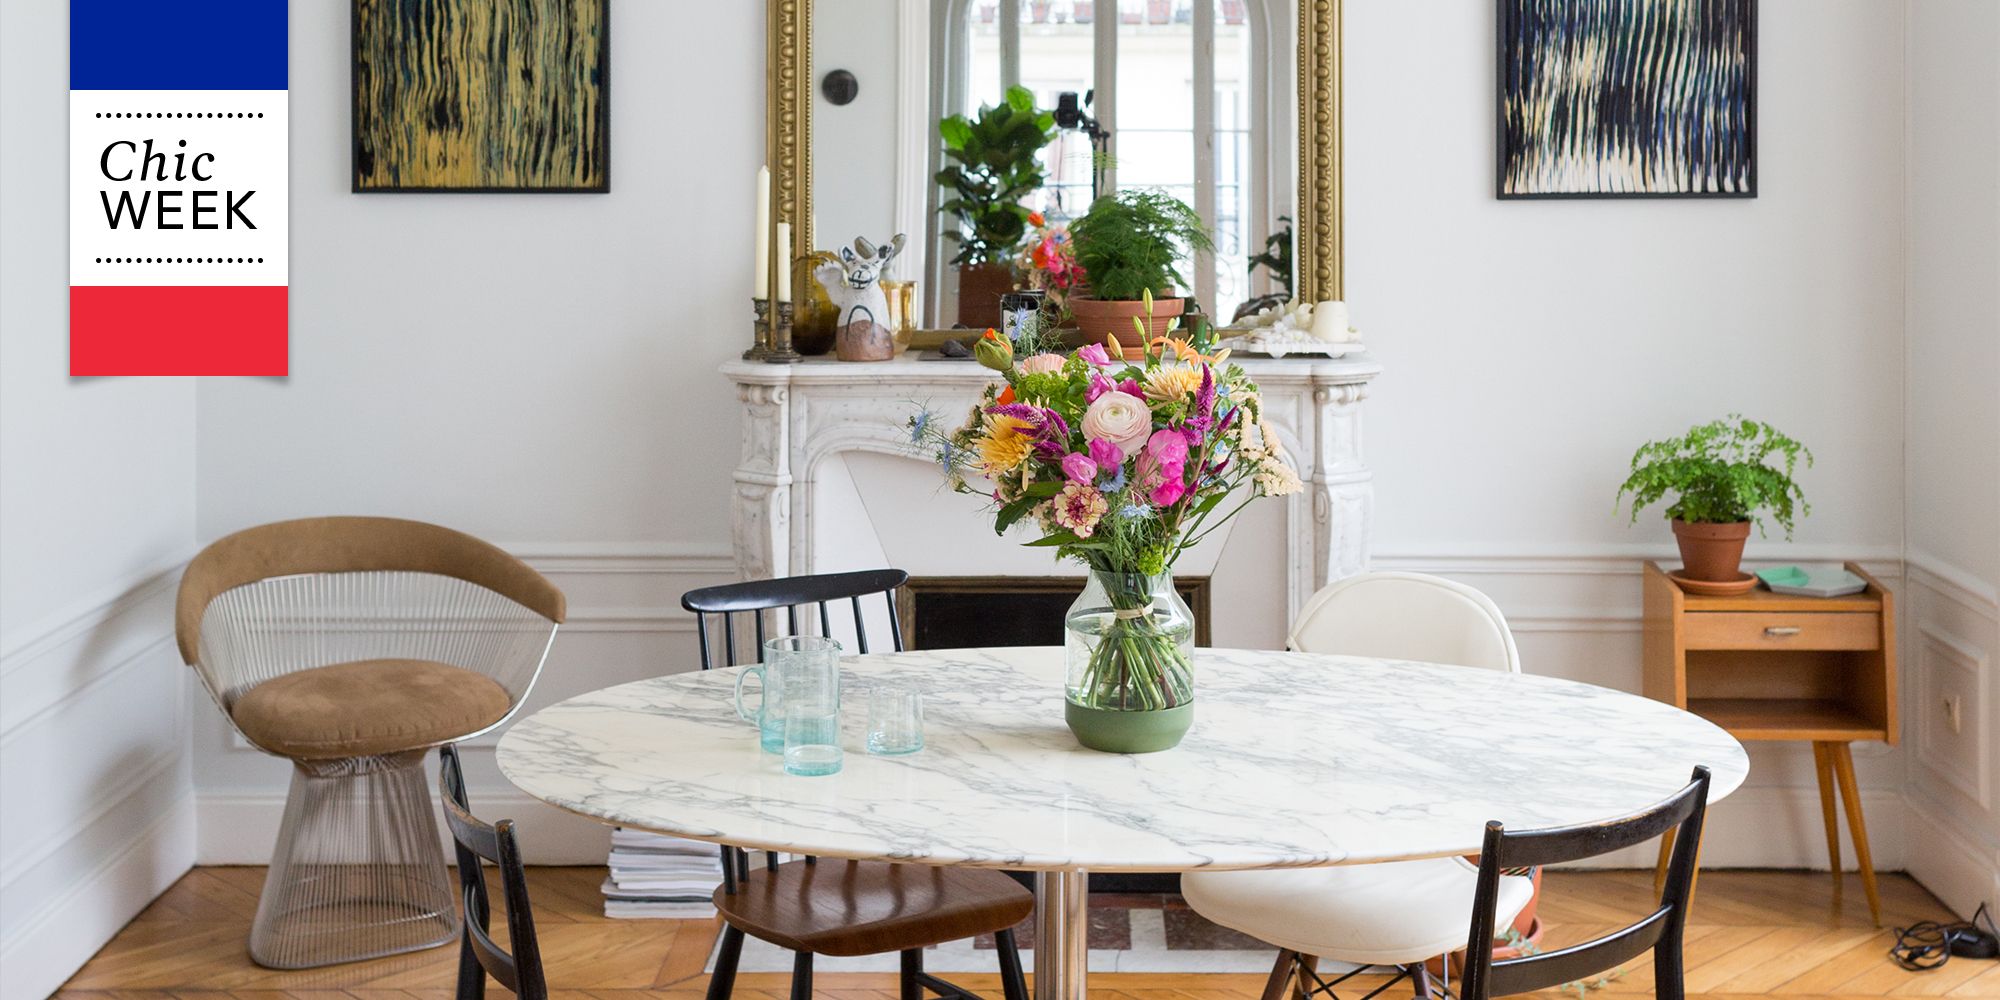 7 French Interior Design Rules To Live By - French Style Homes